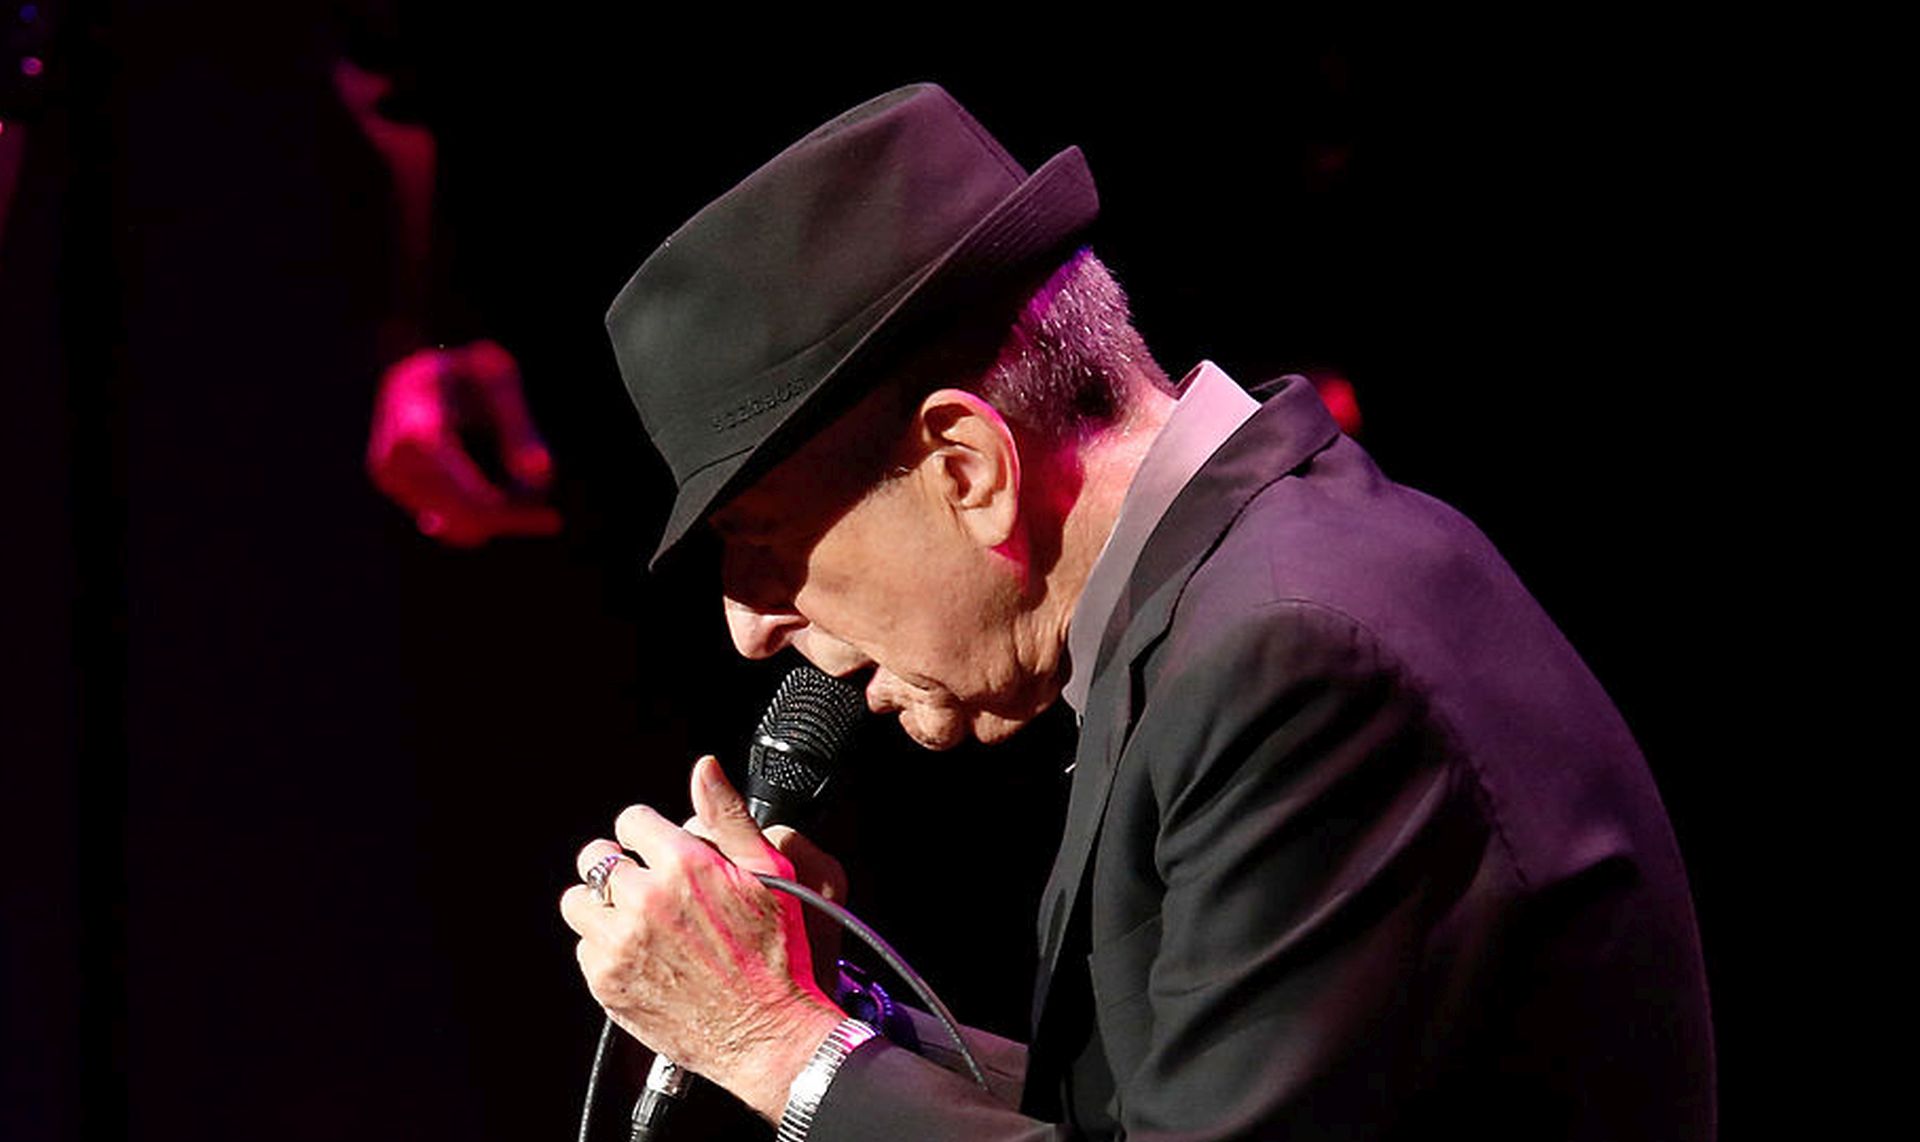 NEW YORK, NY - APRIL 06:  Singer/musician Leonard Cohen performs at Radio City Music Hall on April 6, 2013 in New York City.  (Photo by Jemal Countess/Getty Images)